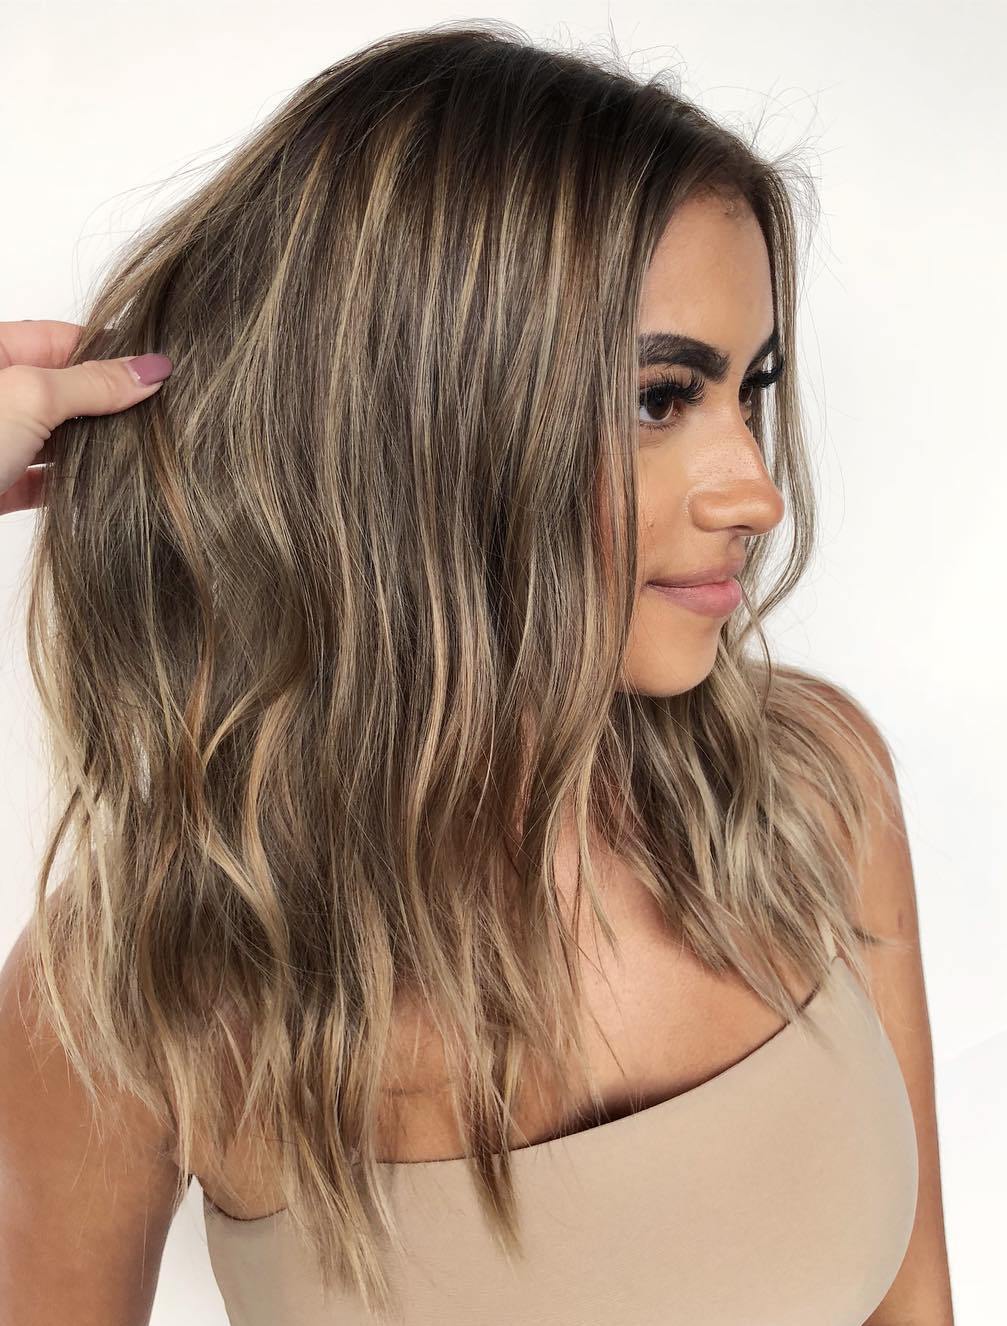 Brown Hair With Thin Blonde Highlights